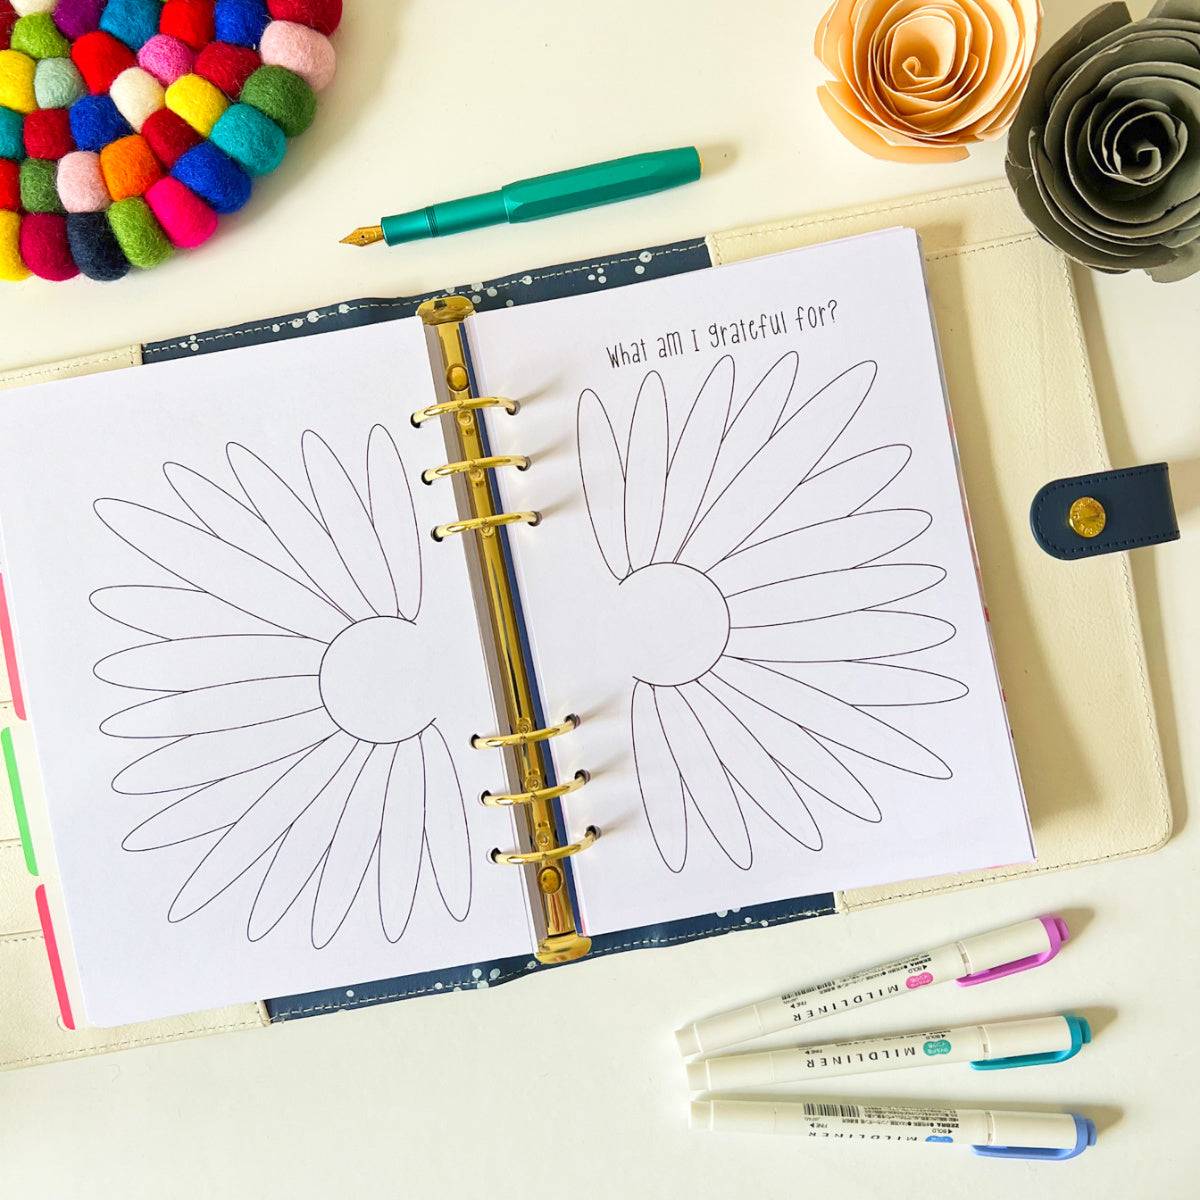 A Monthly Gratitude Log open to a page with two large, blank daisy illustrations to be filled in. Above the daisies, the words "What am I grateful for?" are printed. Surrounding the log are a colorful coaster, pens, a closed memory planner, and a paper flower.